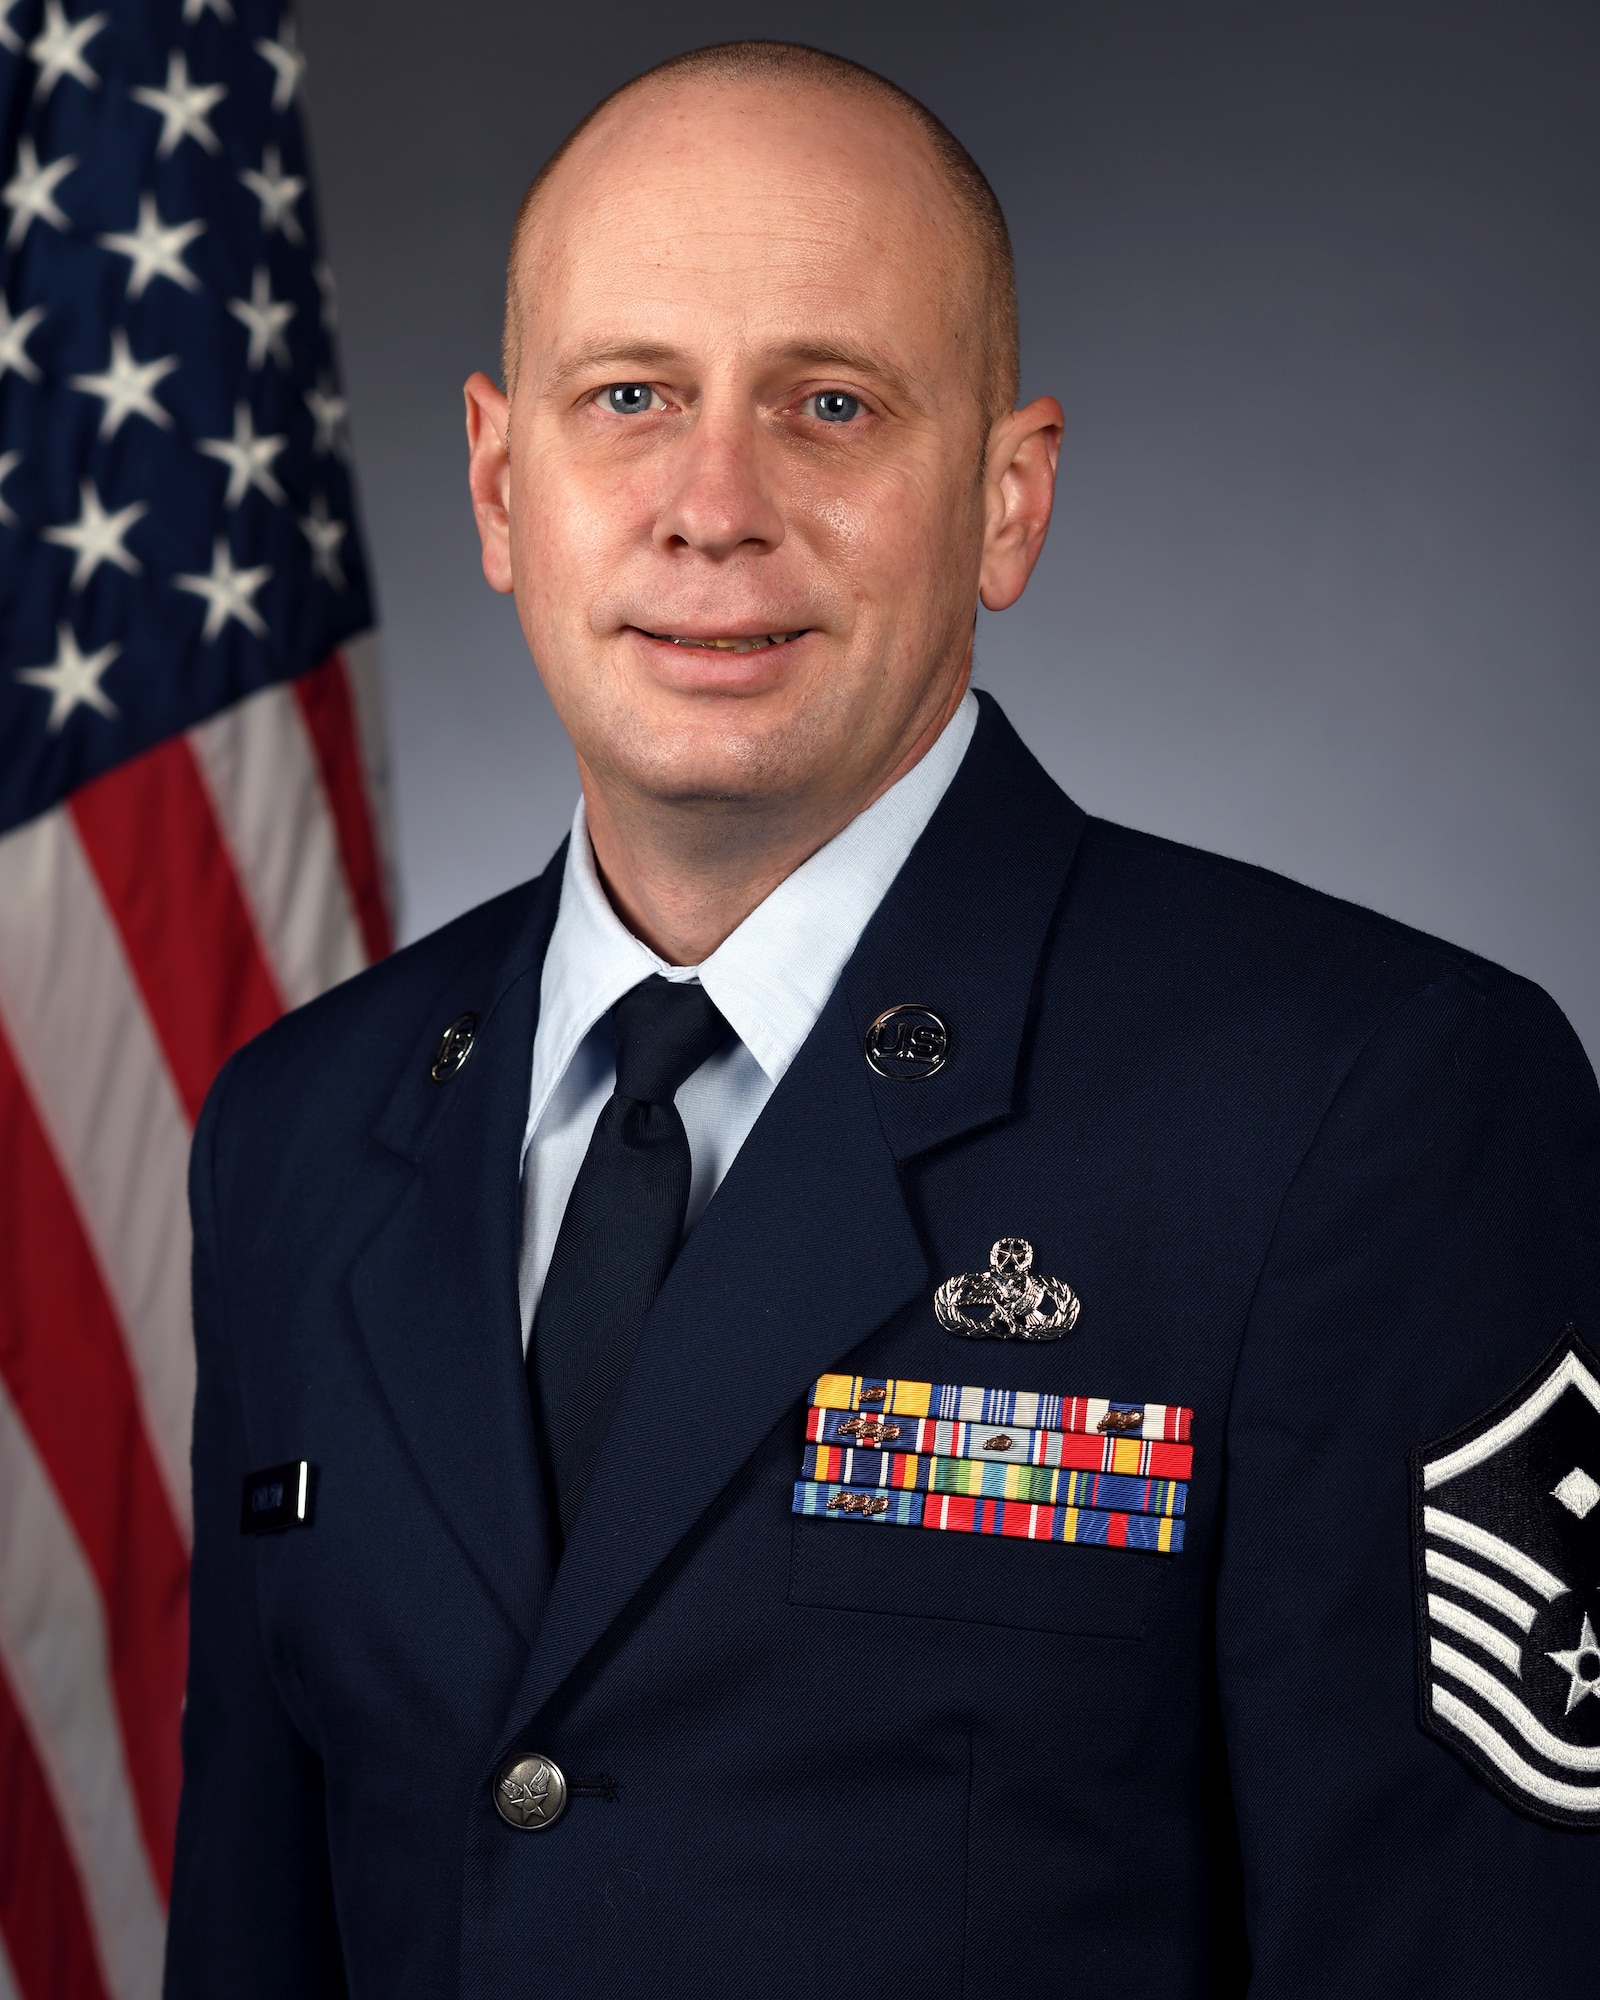 Official Air Force photo for Master Sgt. Jeff Carlson. Carlson is the 131st Bomb Wing's 2022 Outstanding First Sergeant of the Year. (U.S. Air Force photo by Airman 1st Class Victoria Hommel)